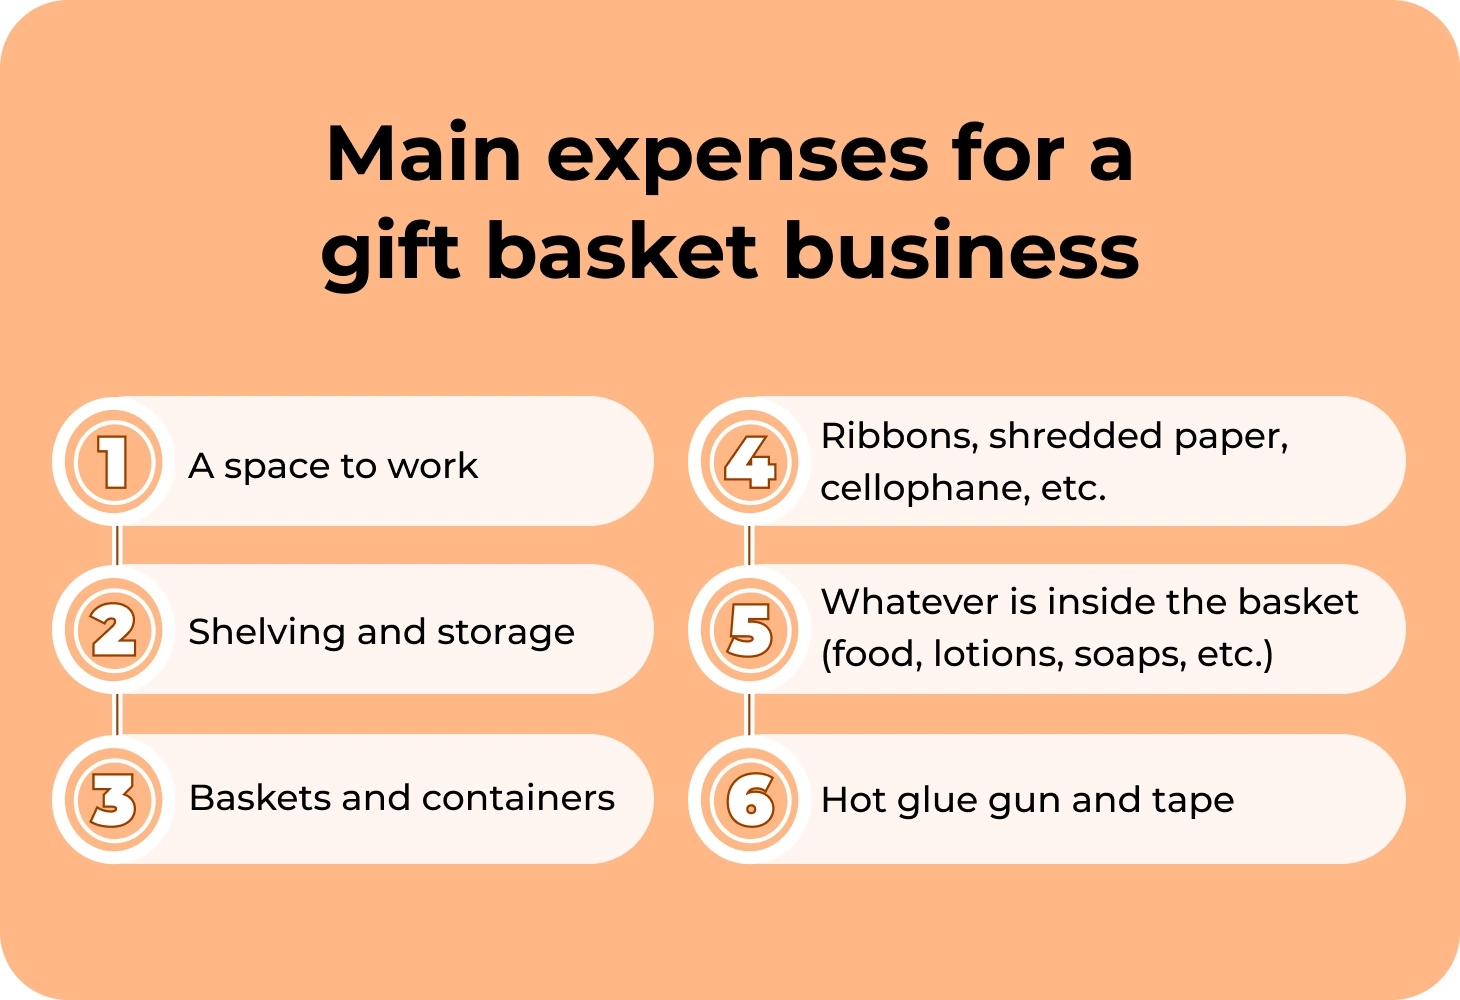 Main expenses of a gift basket business